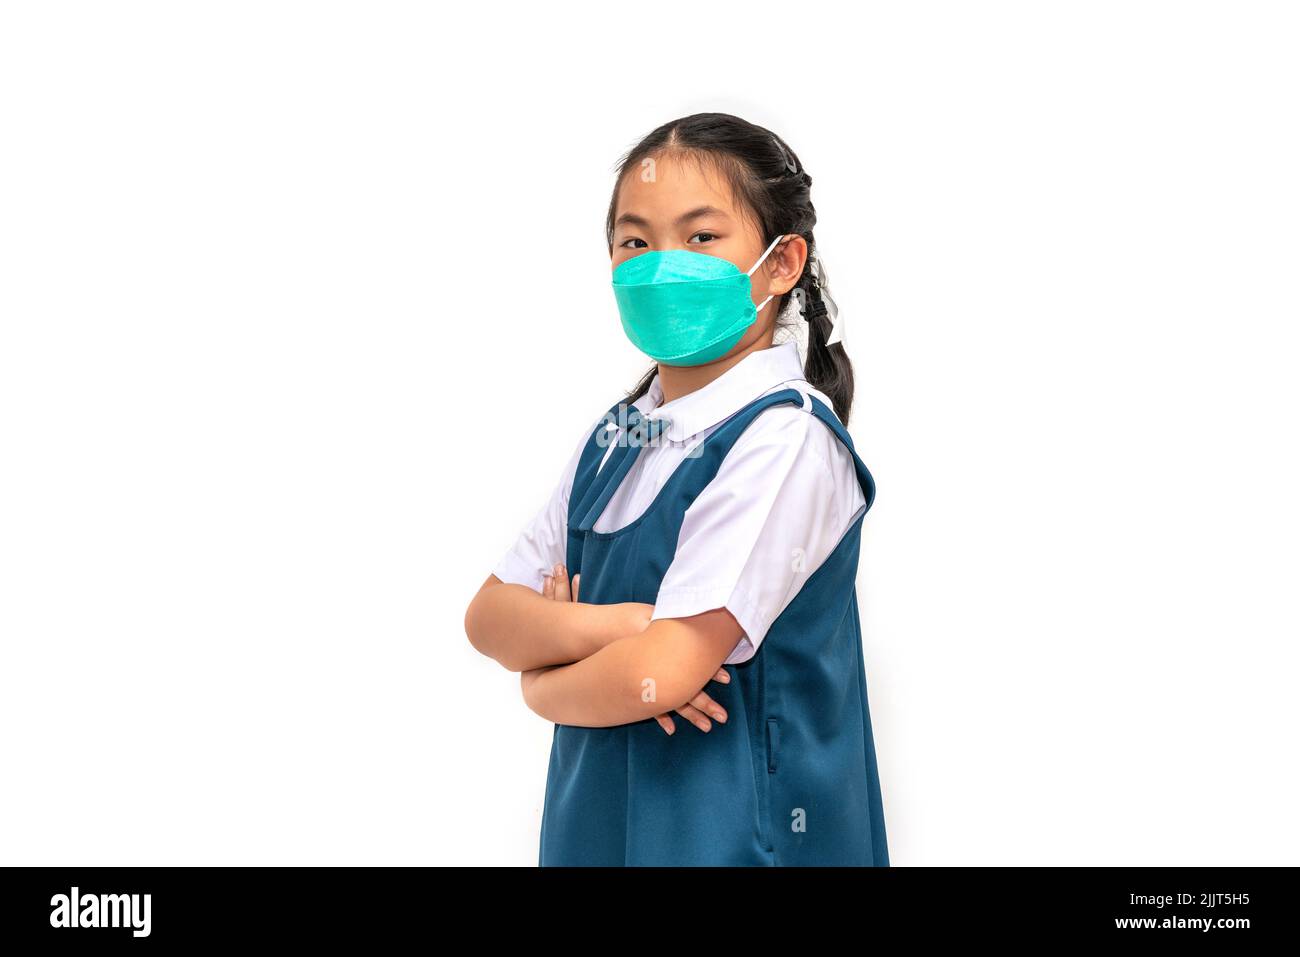 Asian student small child girl wears face mask or medical face mask, student in uniform, arms cross on chest, eyes look at camera with confident emoti Stock Photo